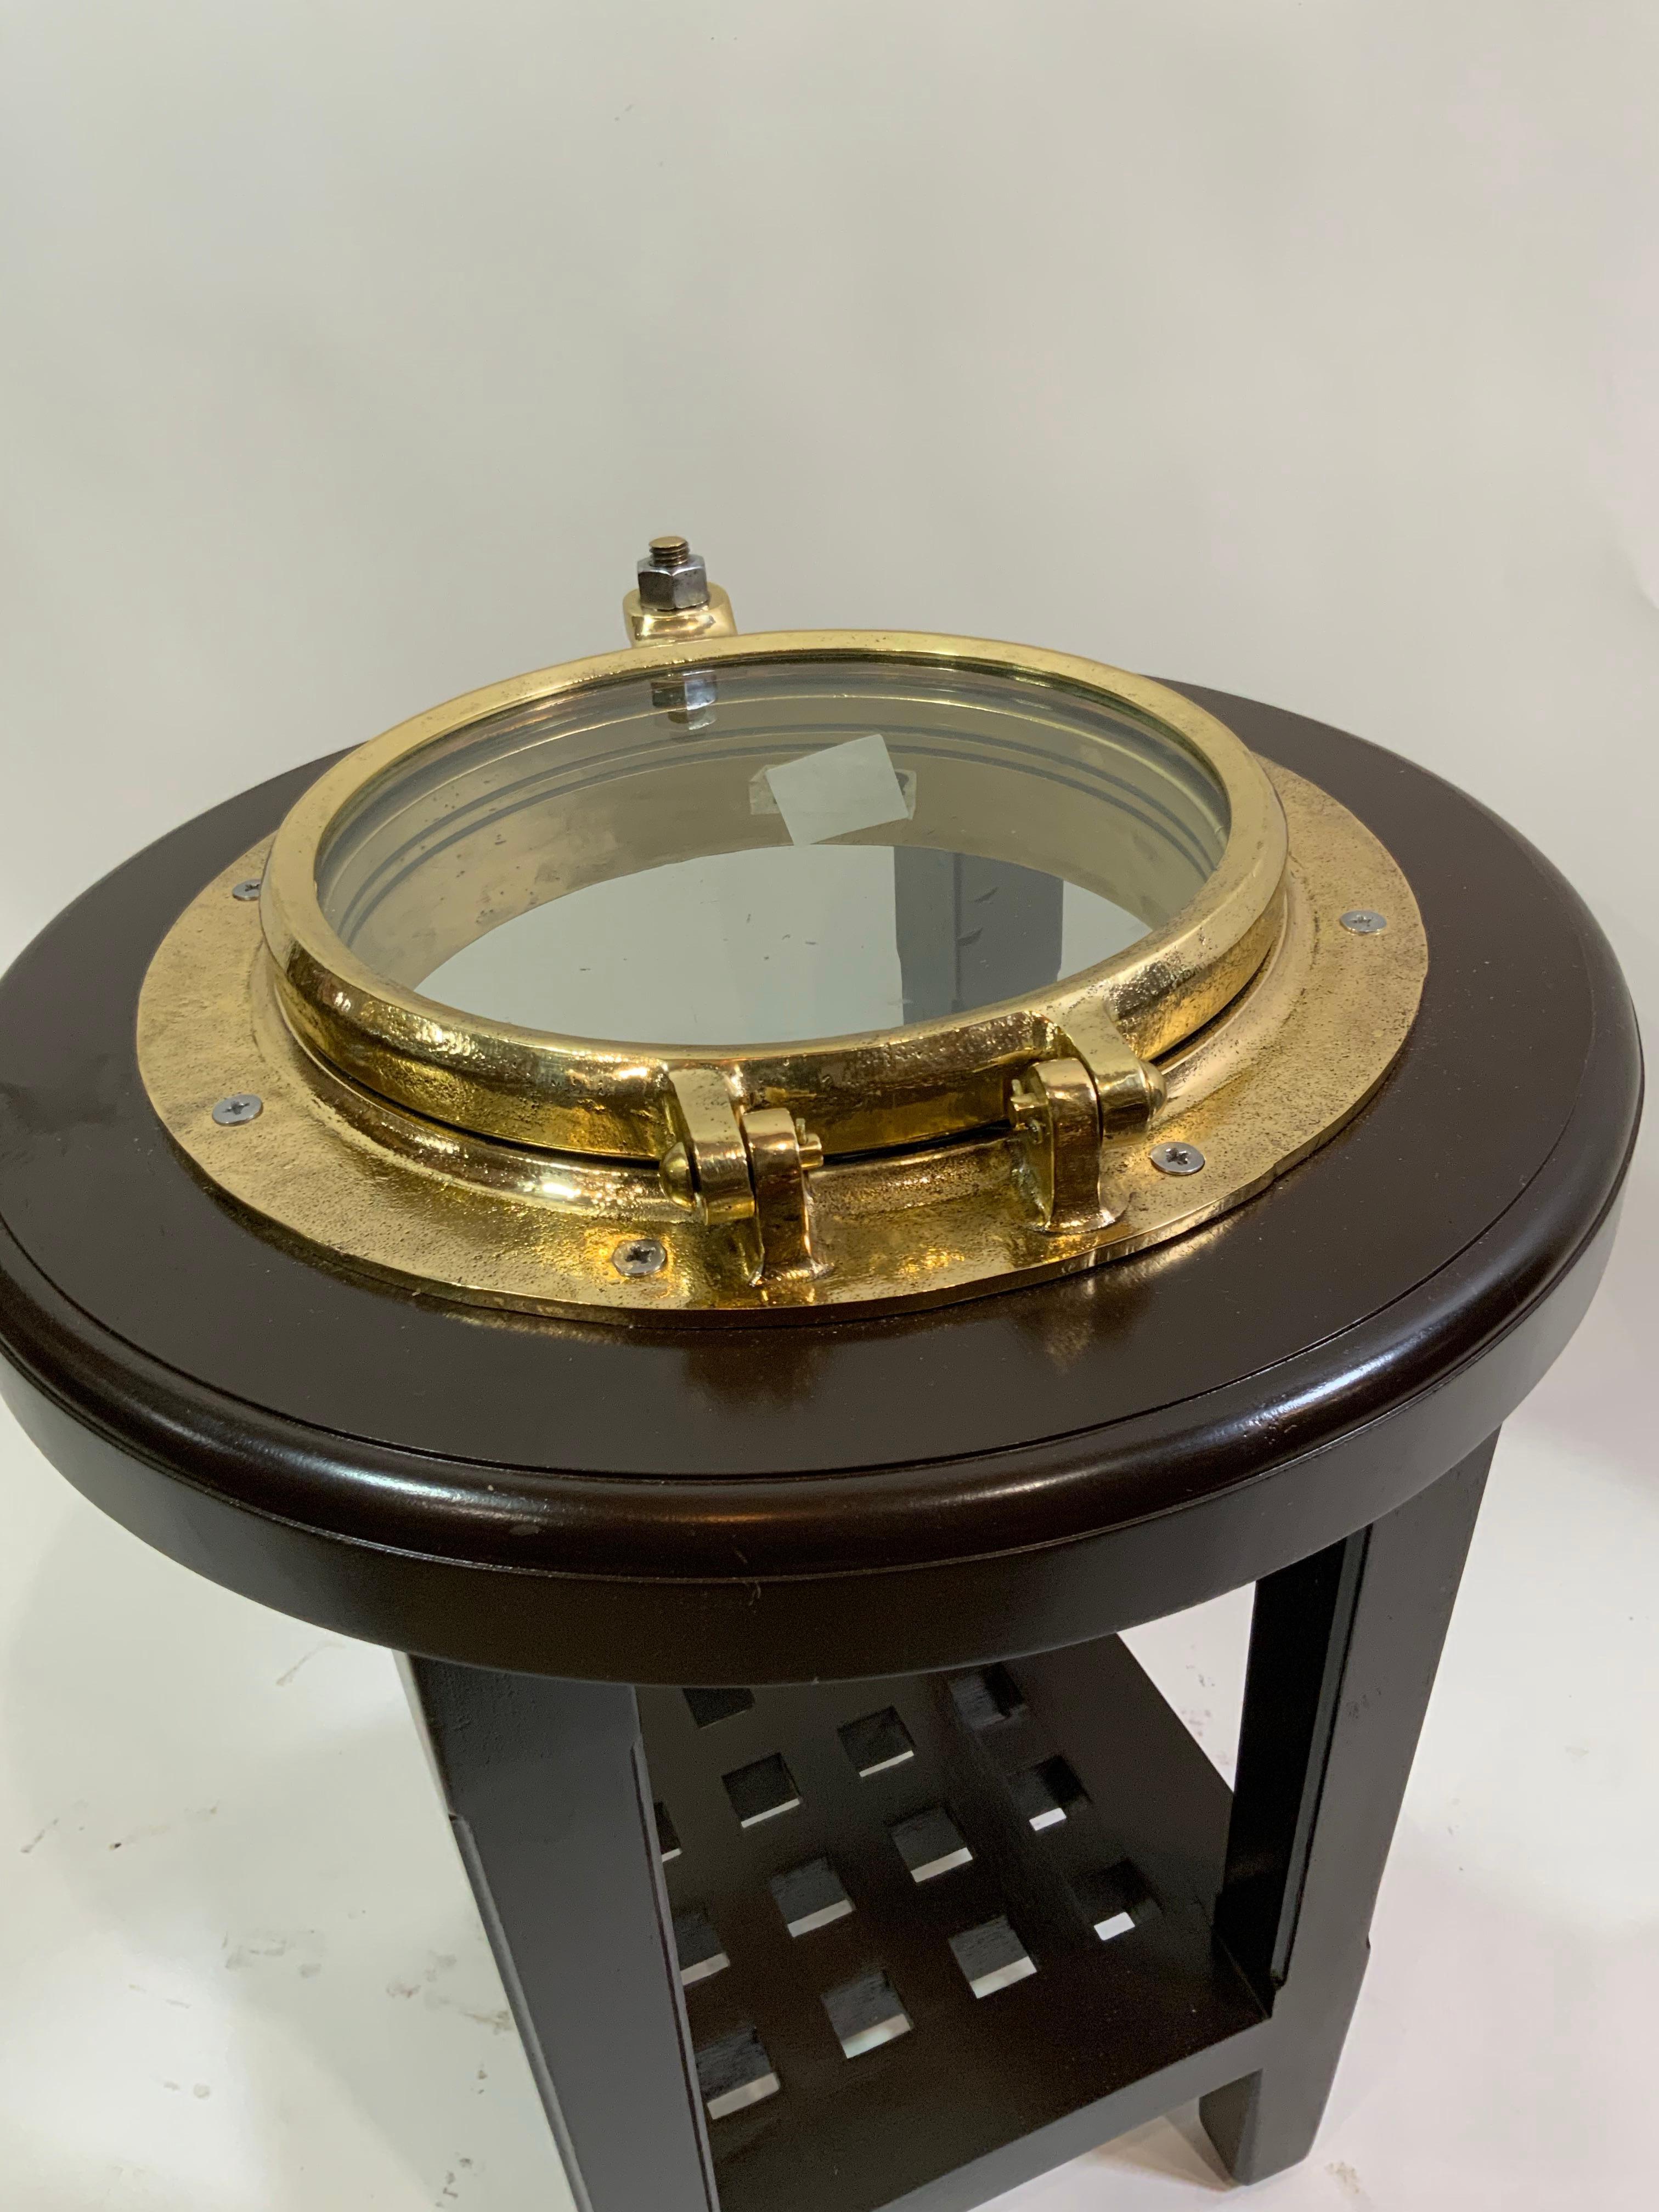 Ships porthole that has been meticulously polished and lacquered, then mounted into a mahogany table stand. Weight is 33 pounds.Measures: Diameter of table is 24 inches. Height is 19 tall.